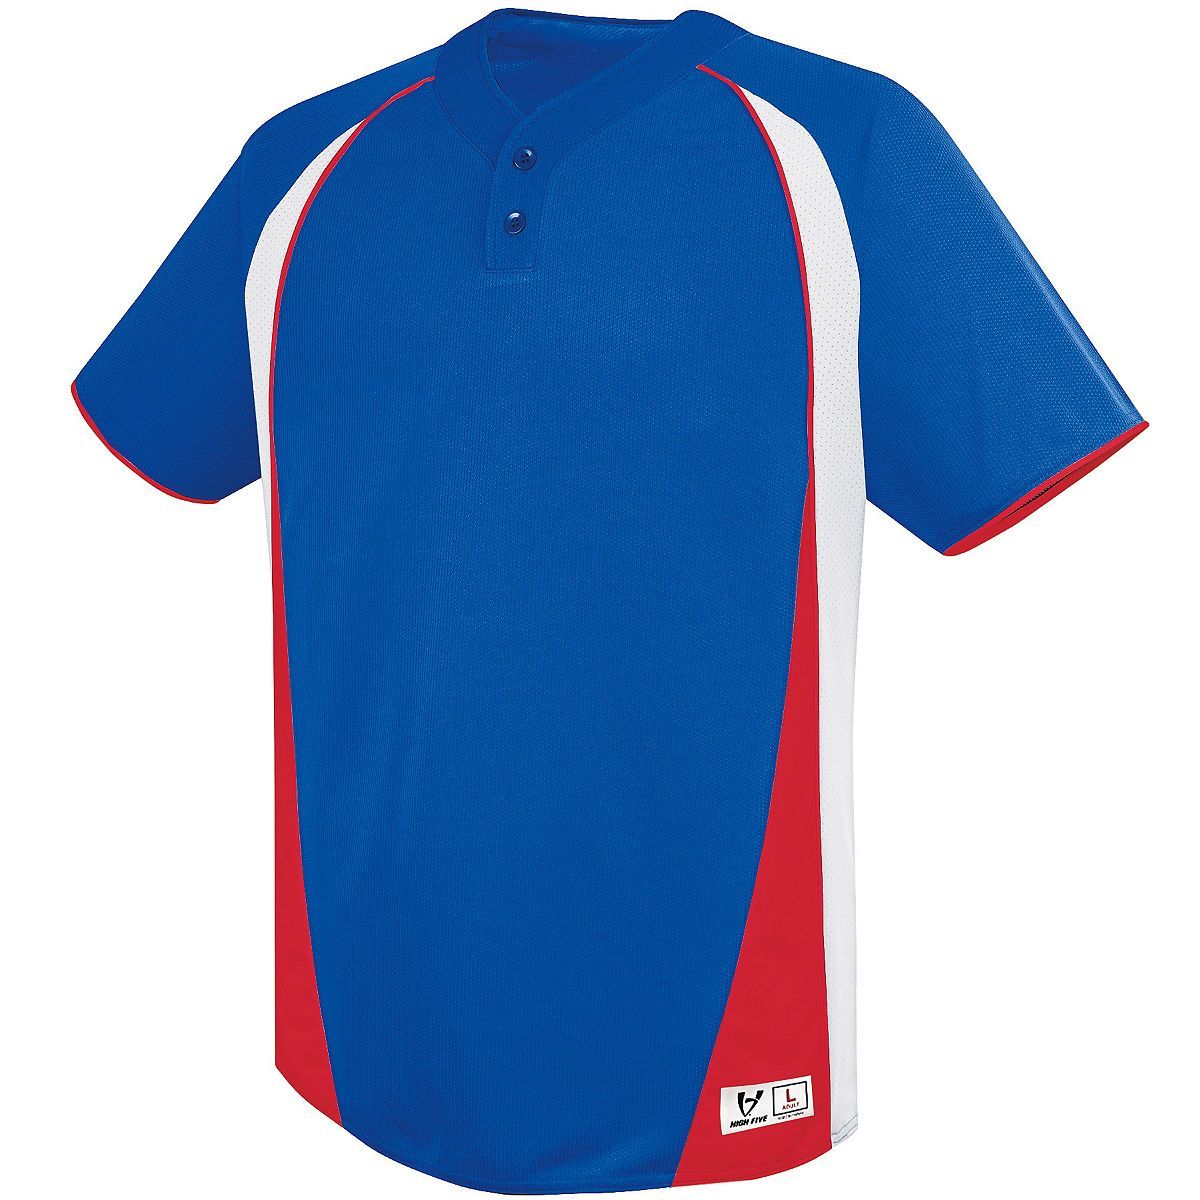 Augusta Sportswear Youth Ace Two-Button Jersey in Royal/White/Scarlet  -Part of the Youth, Youth-Jersey, Augusta-Products, Baseball, Shirts, All-Sports, All-Sports-1 product lines at KanaleyCreations.com